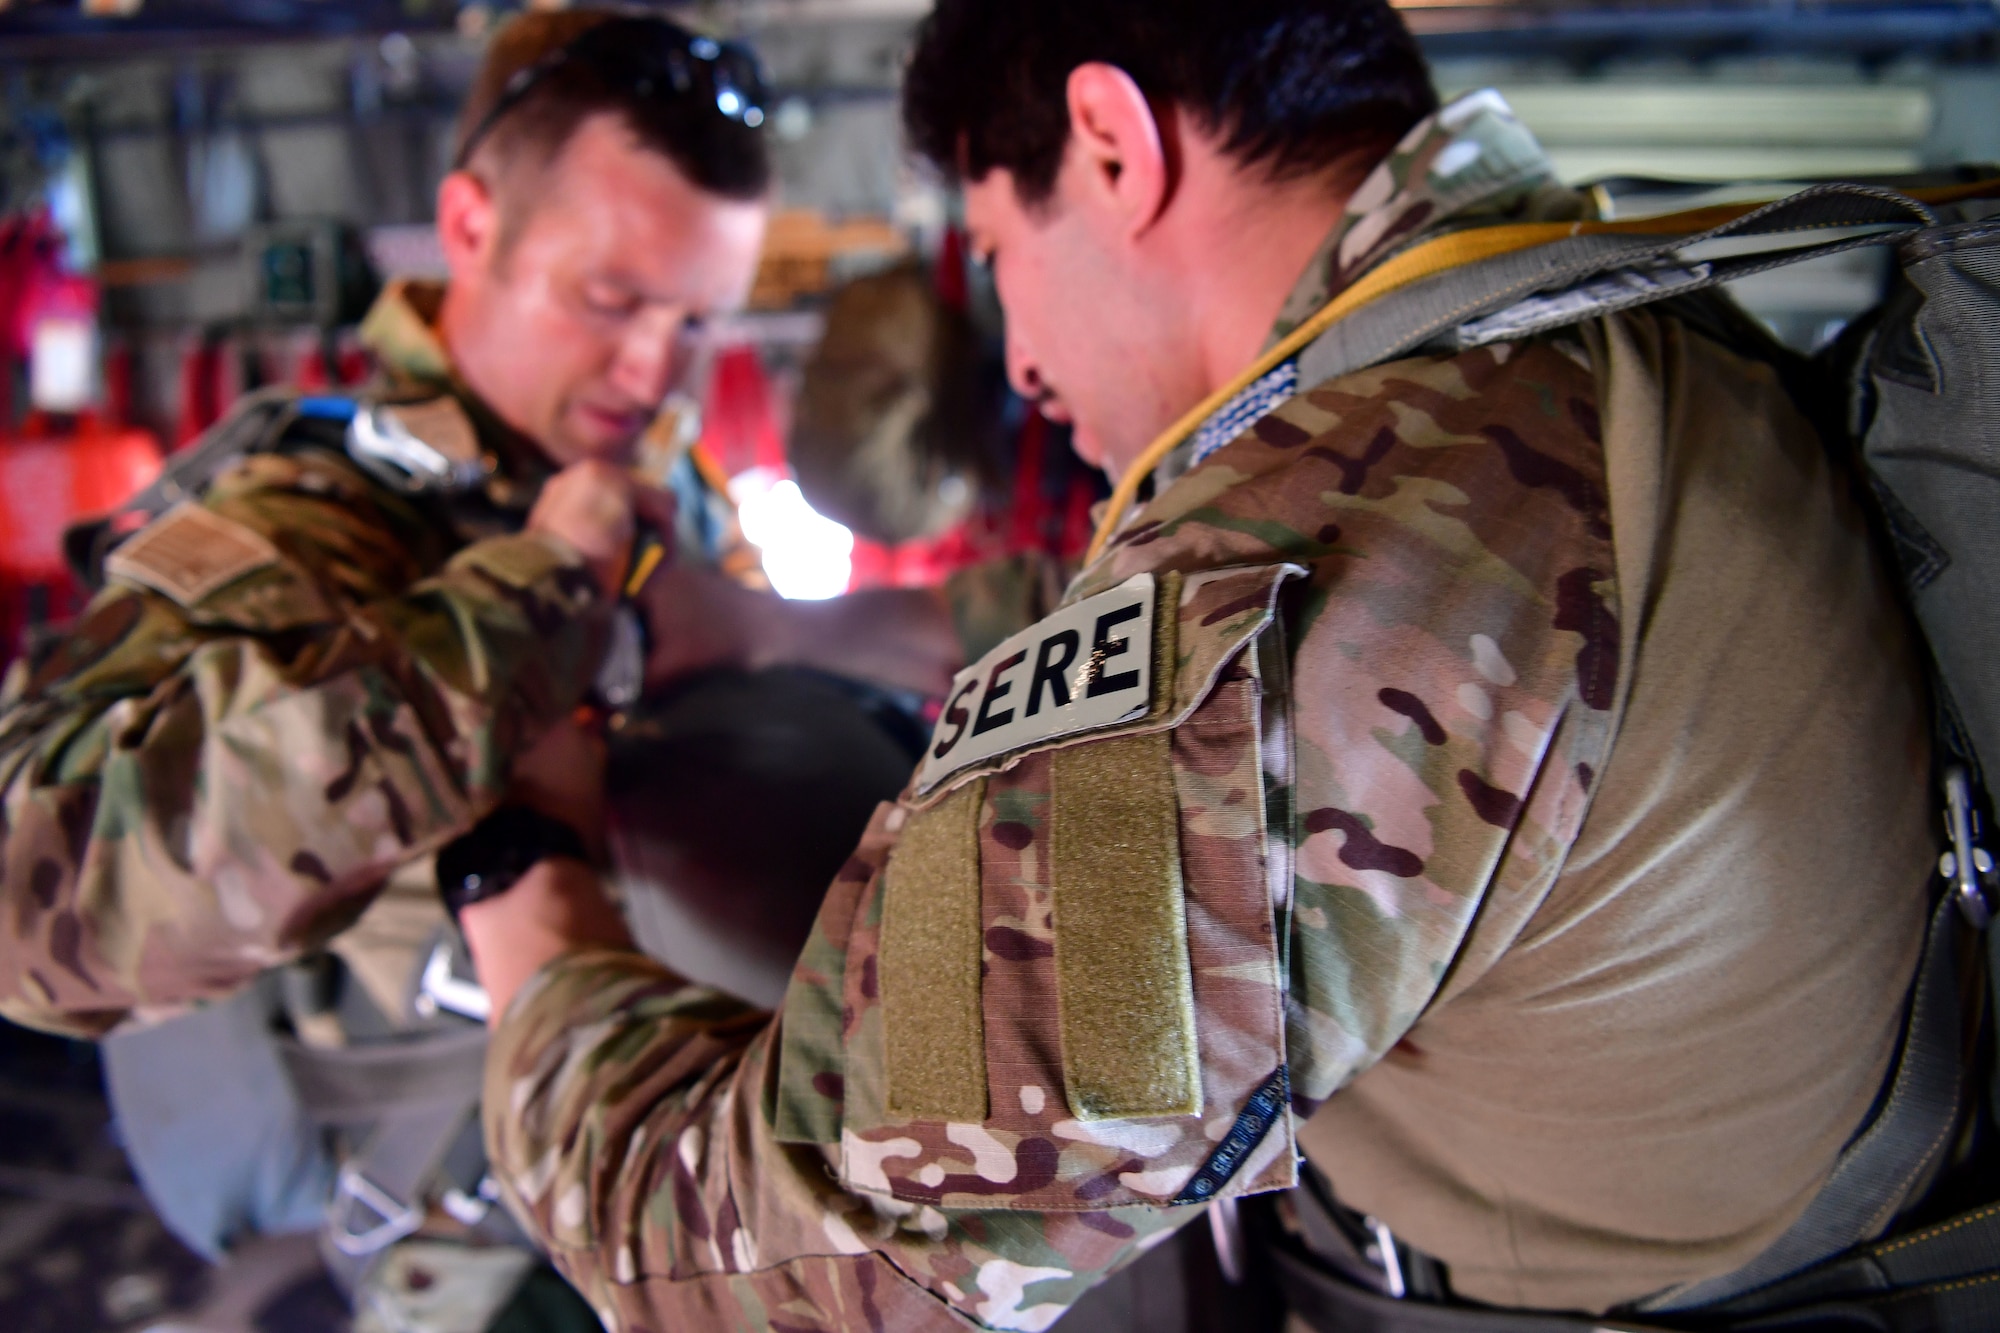 Tech. Sgt. Nader Maghribi, 19th Operations Support Squadron Survival Evasion Resistance and Escape specialist, performs an equipment check on U.S. Air Force Master Sgt. Ed Dawejko, 19th OSS SERE specialist, in Florida.